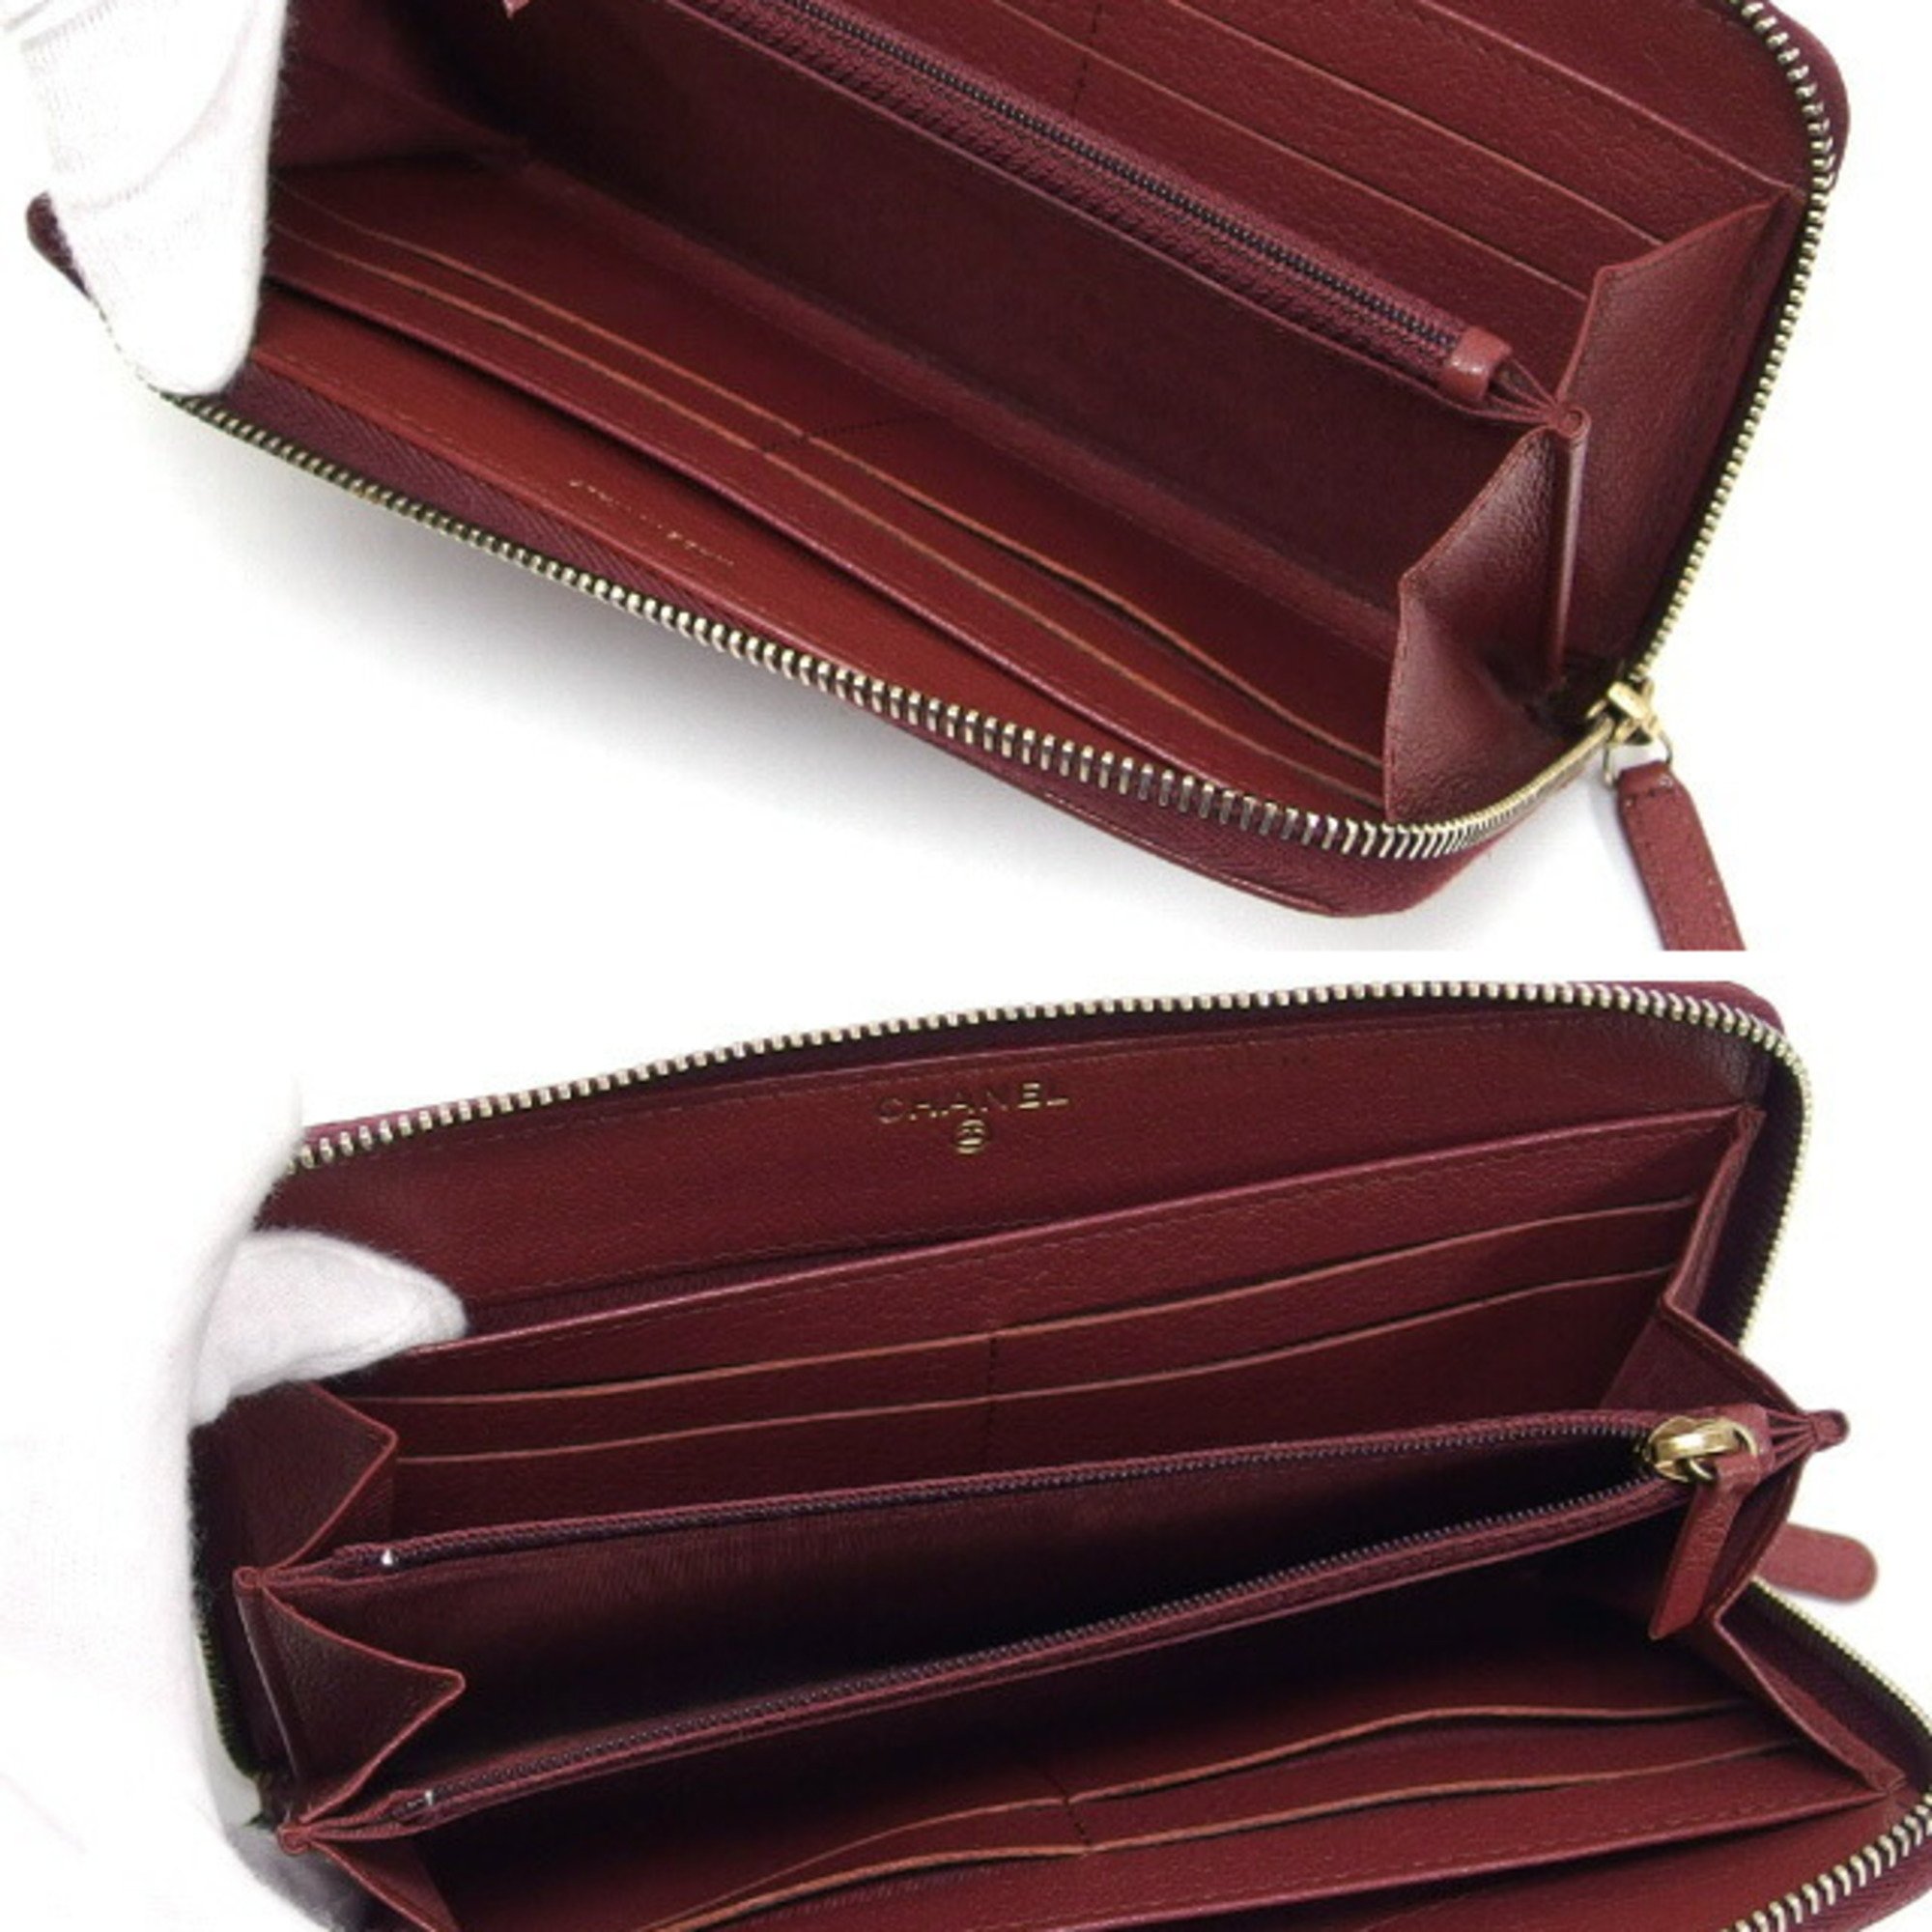 Chanel Soft Caviar Skin Round Long Wallet Bordeaux (Deep Red)